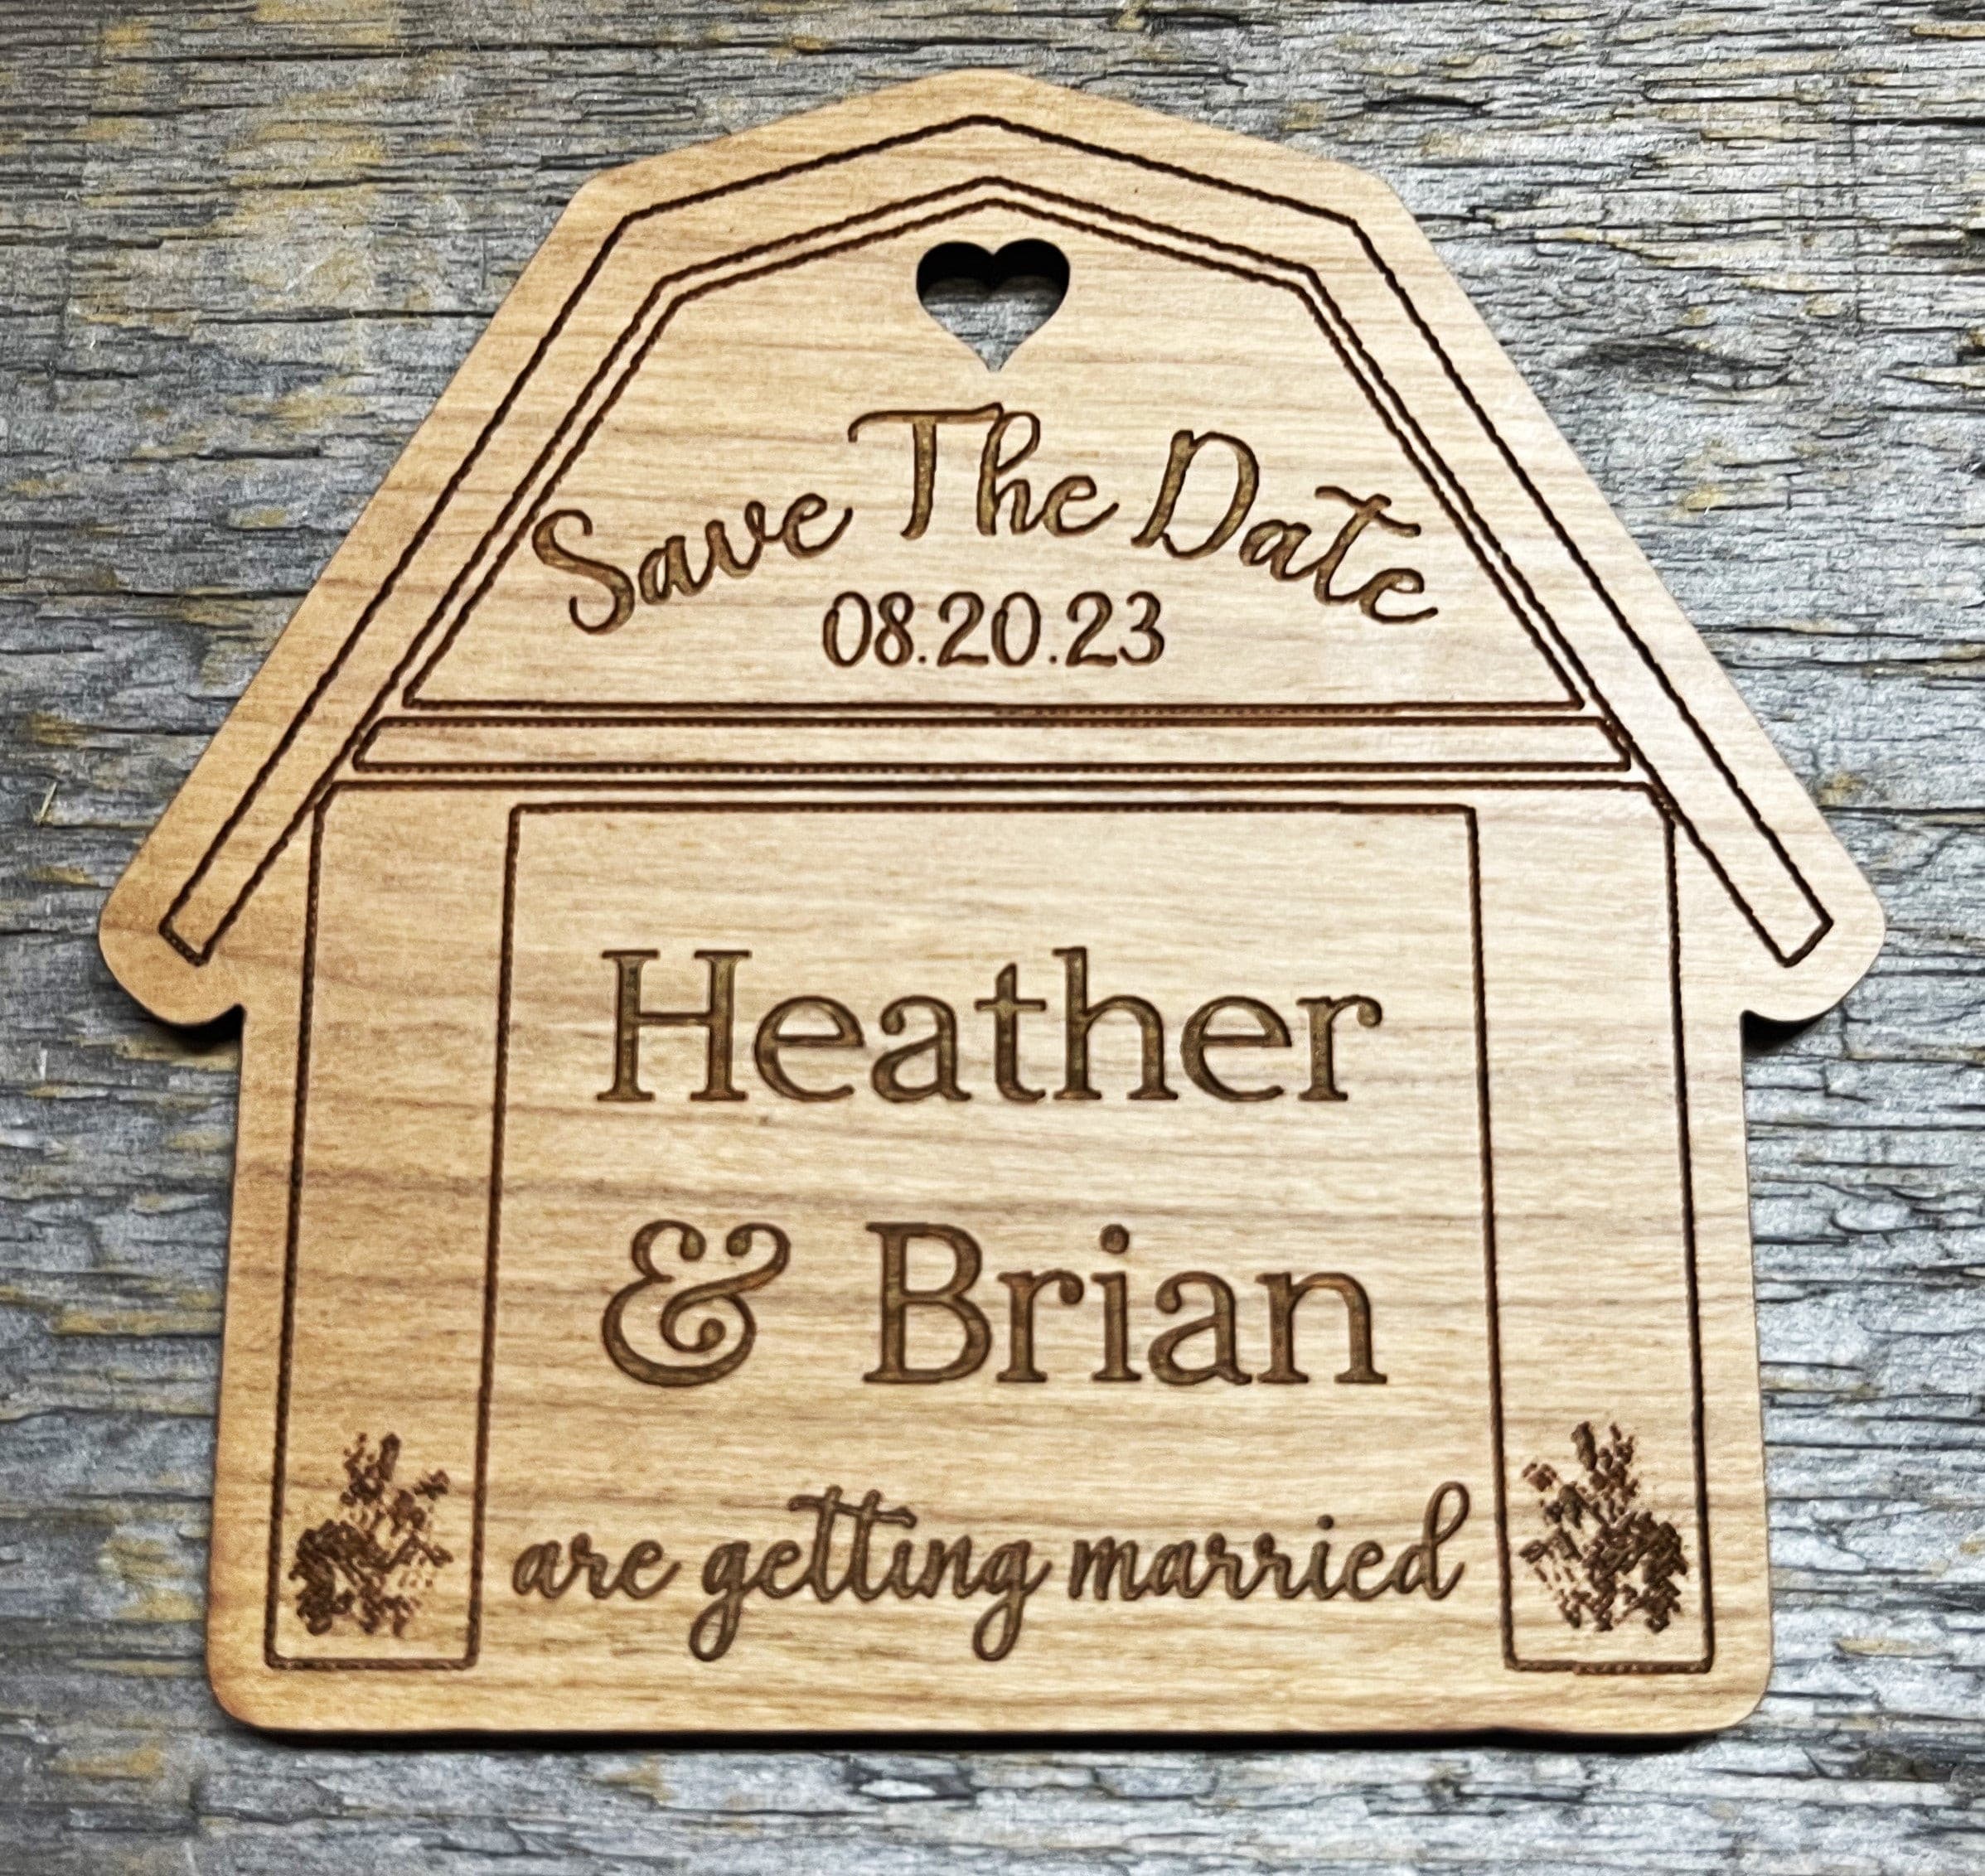 Wooden Flip Flop Save The Date Fridge Magnets, Beach / Abroad